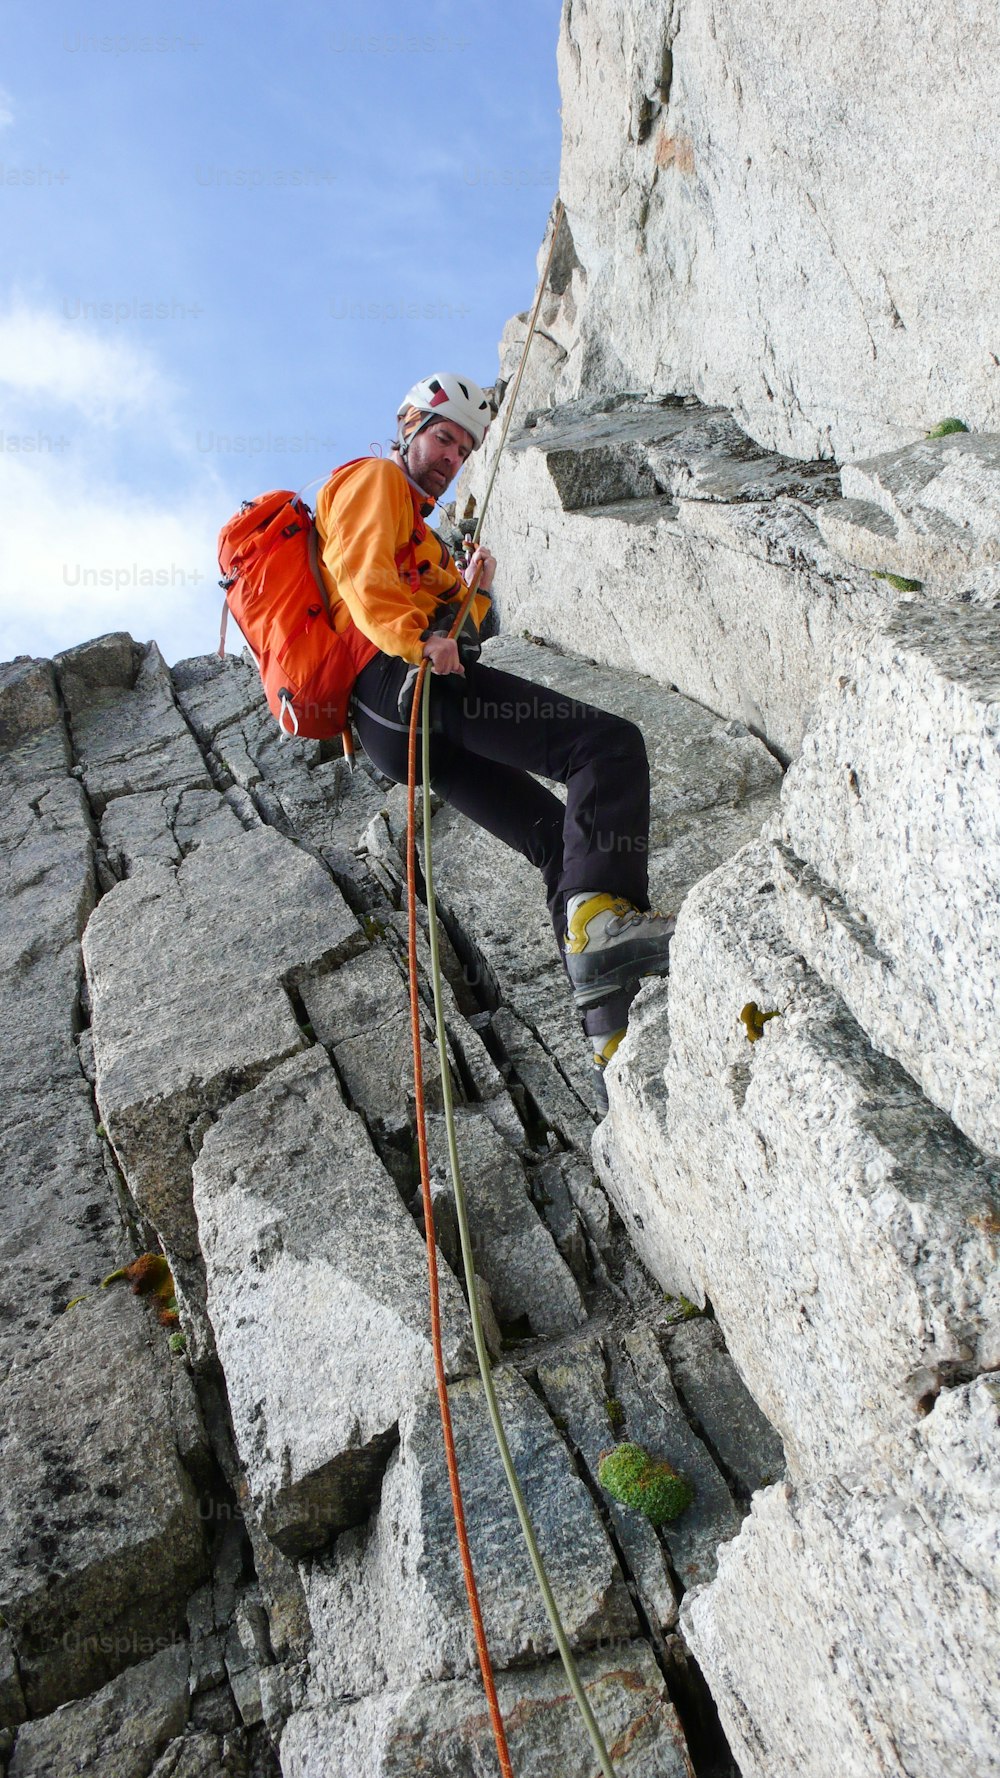 A male mountain climber rappelling off a steep rocky ridge in the French Alps near Chamonix